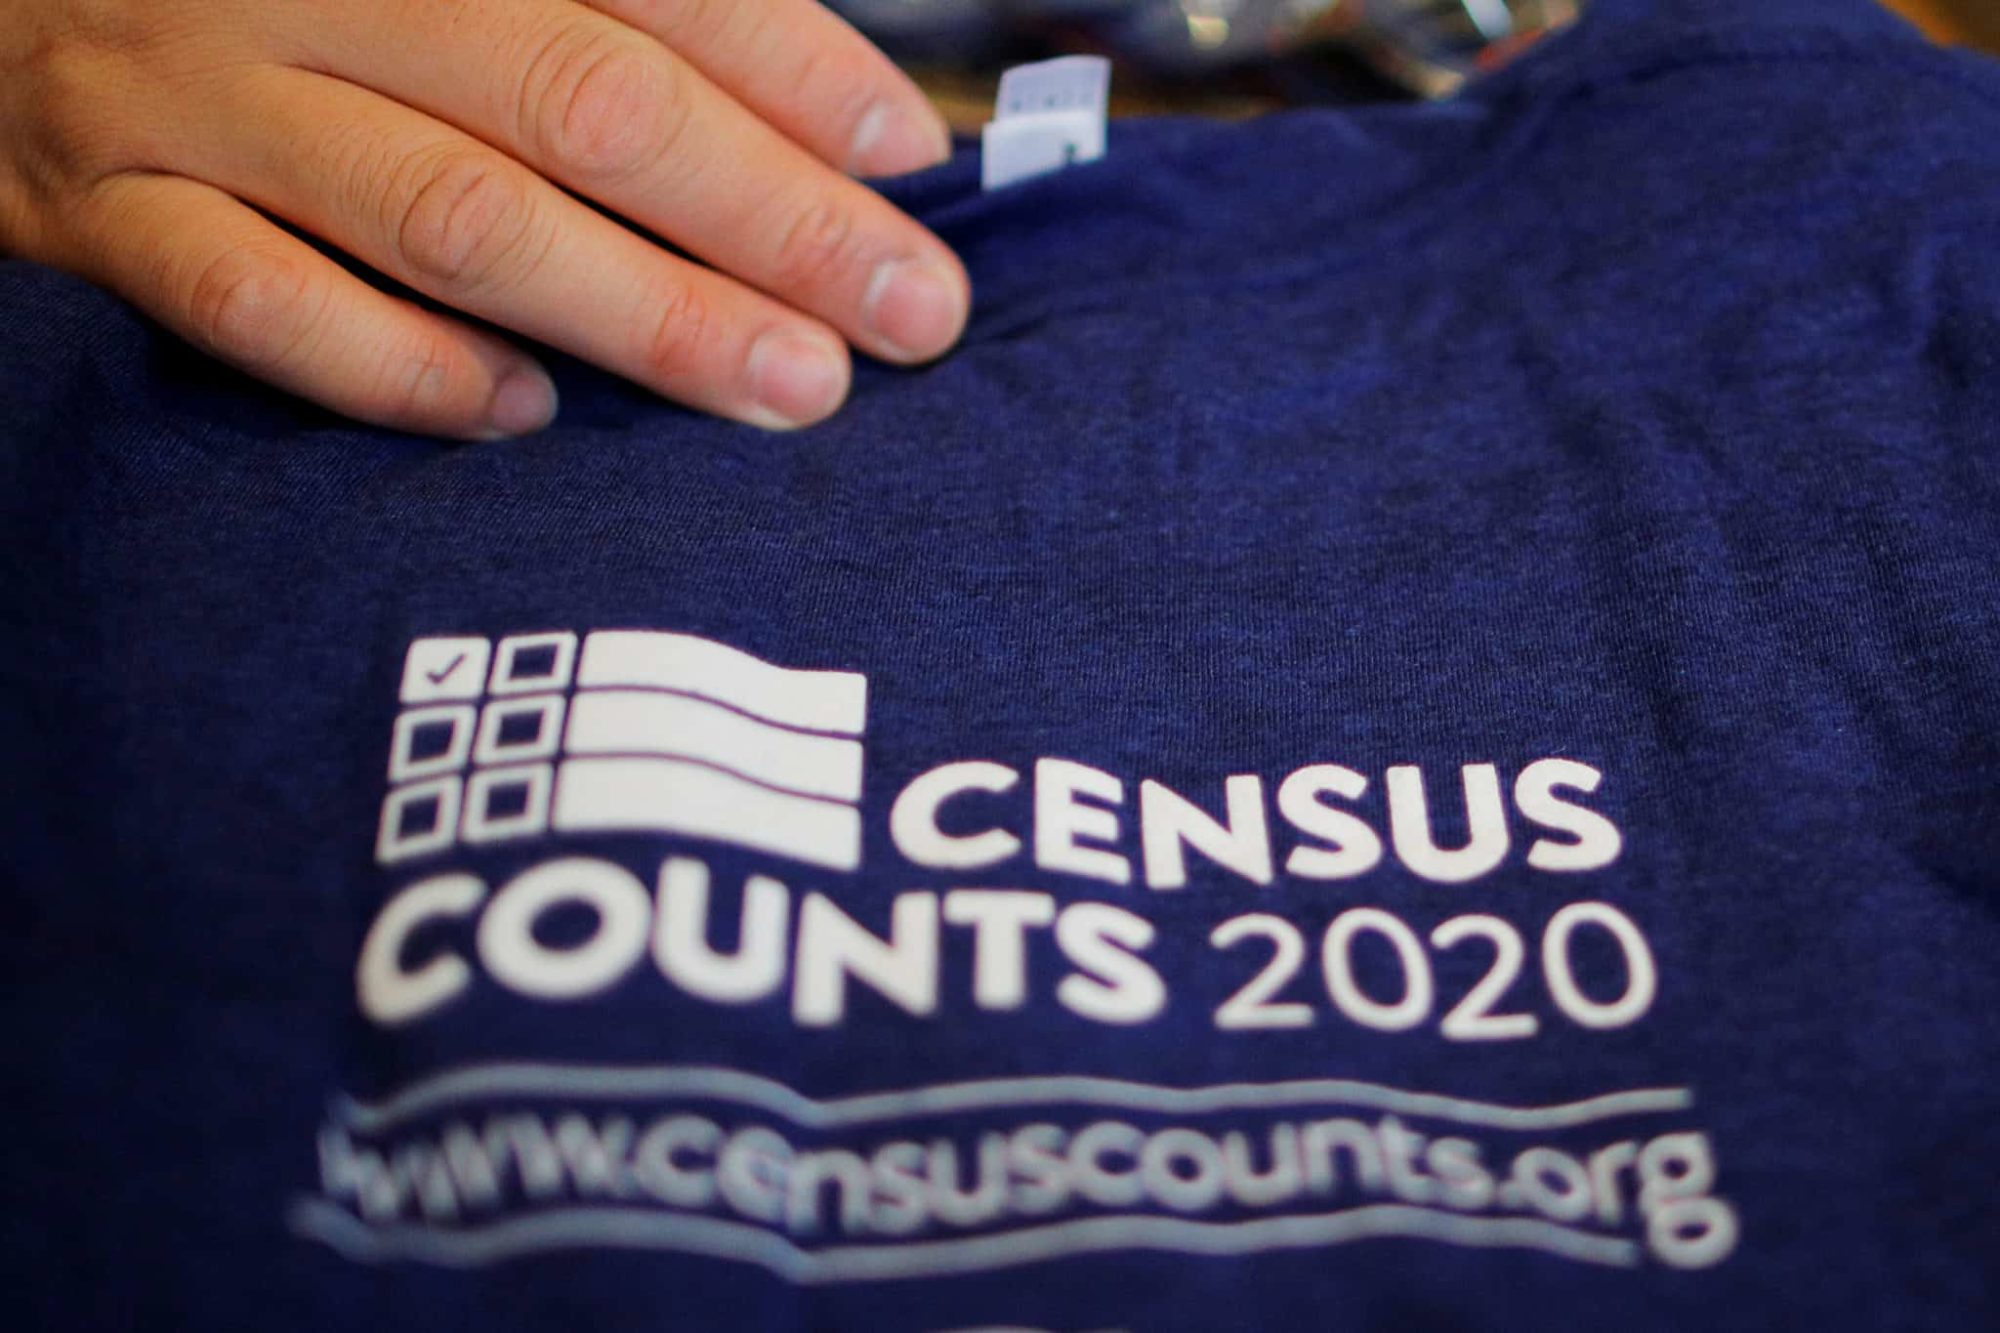 Trump Was Secretly Trying To Rig The Electoral College With Census Citizenship Question